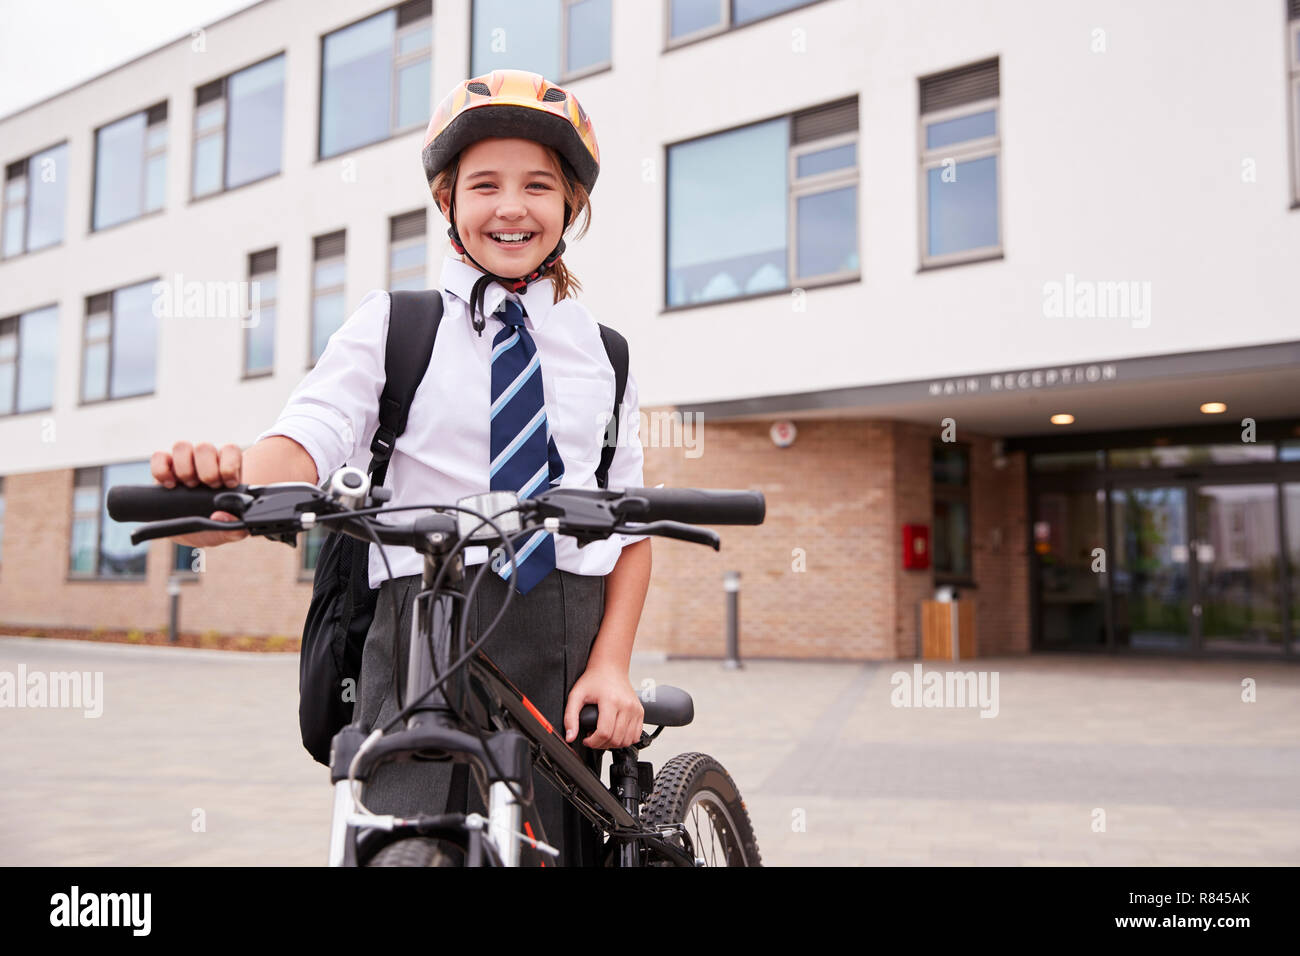 Portrait Of Female High School Student Wearing Uniform With Bicycle Outside School Buildings Stock Photo